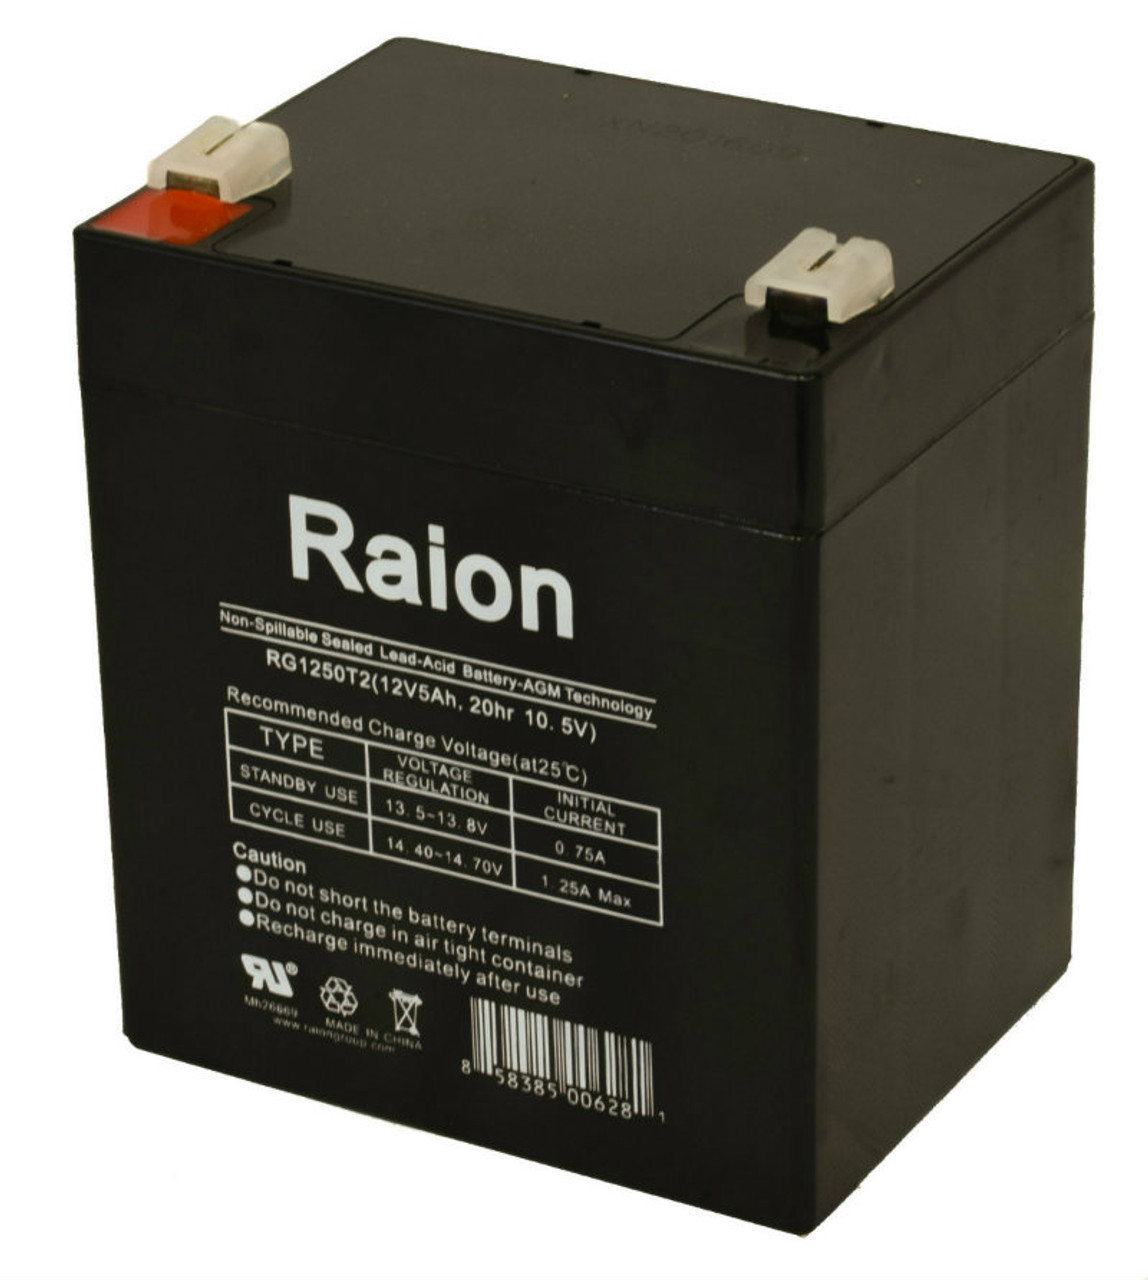 Raion Power RG1250T1 Replacement Alarm Security System Battery for Securitron BPS246